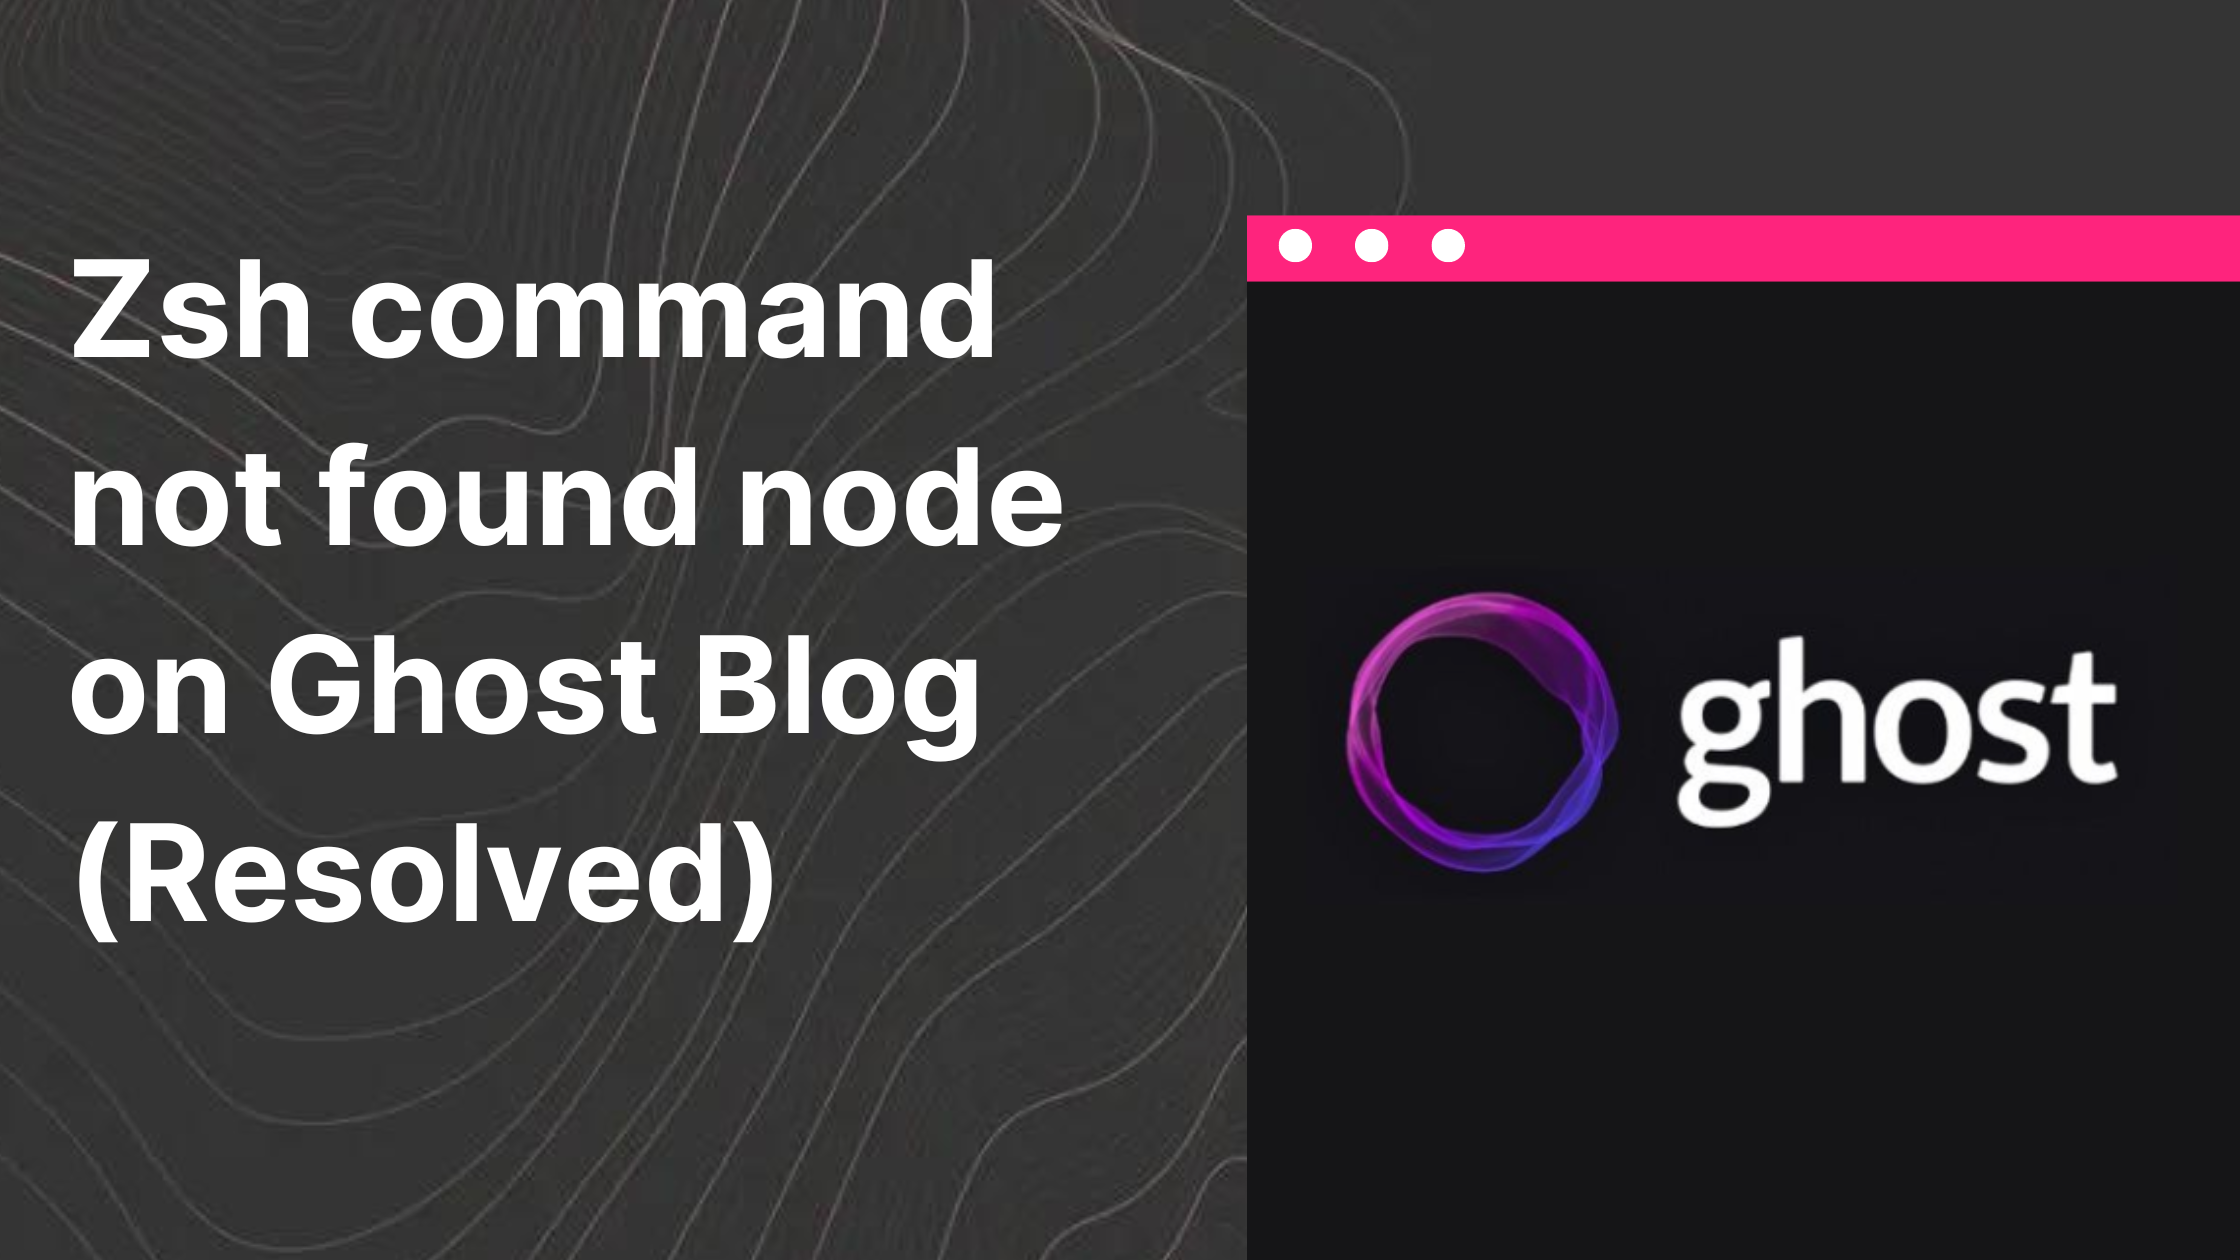 Zsh command not found node on Ghost Blog (Resolved)